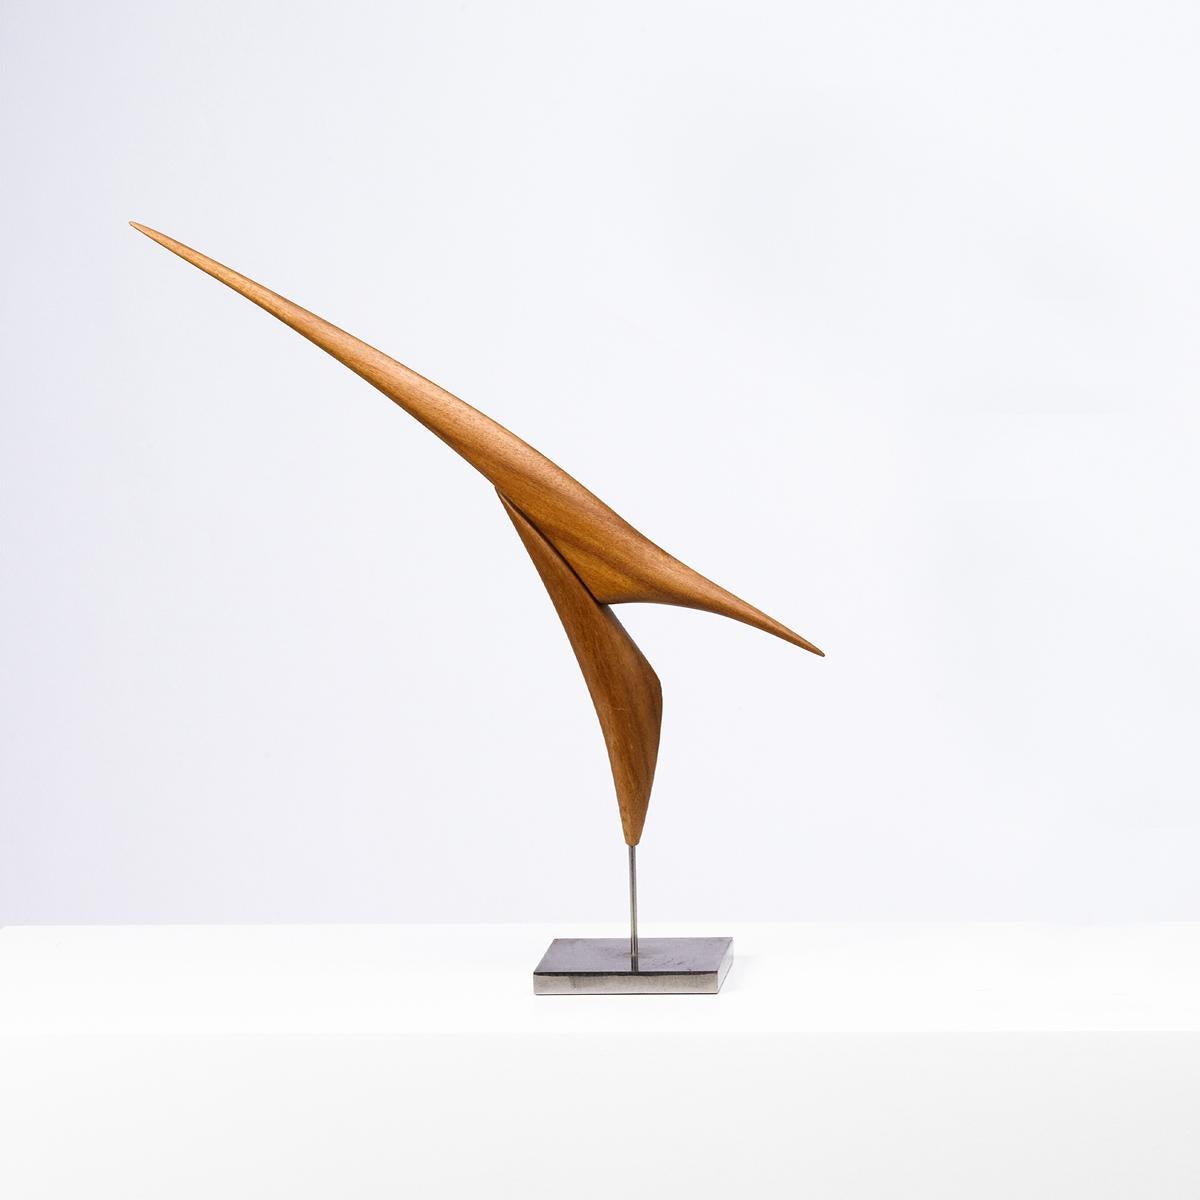 Antoni’s artisanal background gives him the technical quality and ability that highlights his work among others and his artistic approach explores the expressive and aesthetic possibilities of wood. Antoni creates his sculptures in a constant